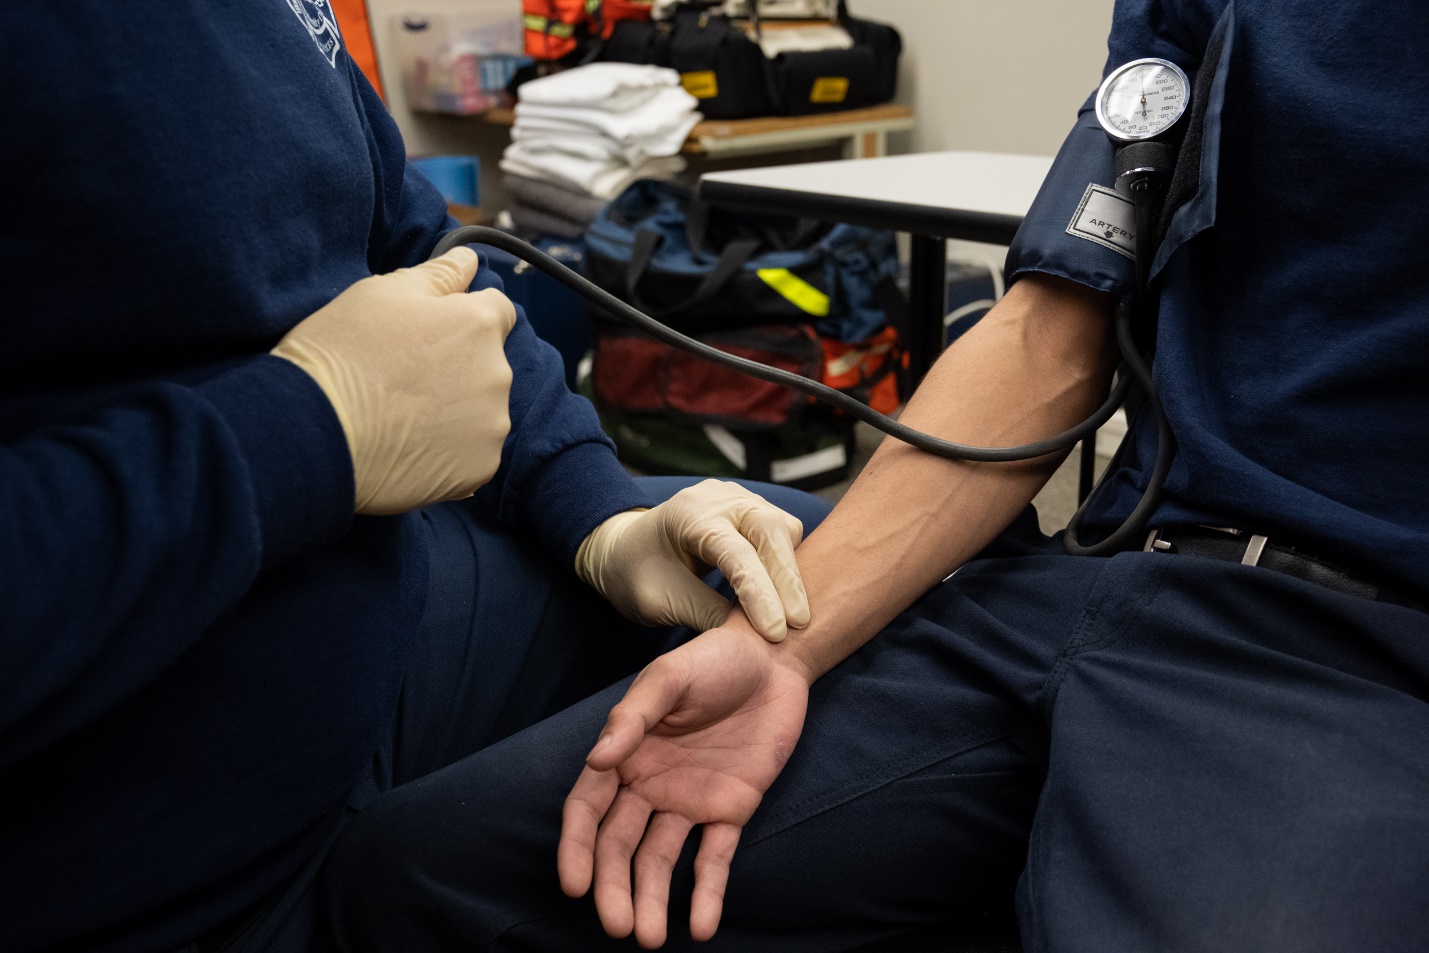 A gloved EMT obtains blood pressure by palpation using two fingers on a patient's wrist.